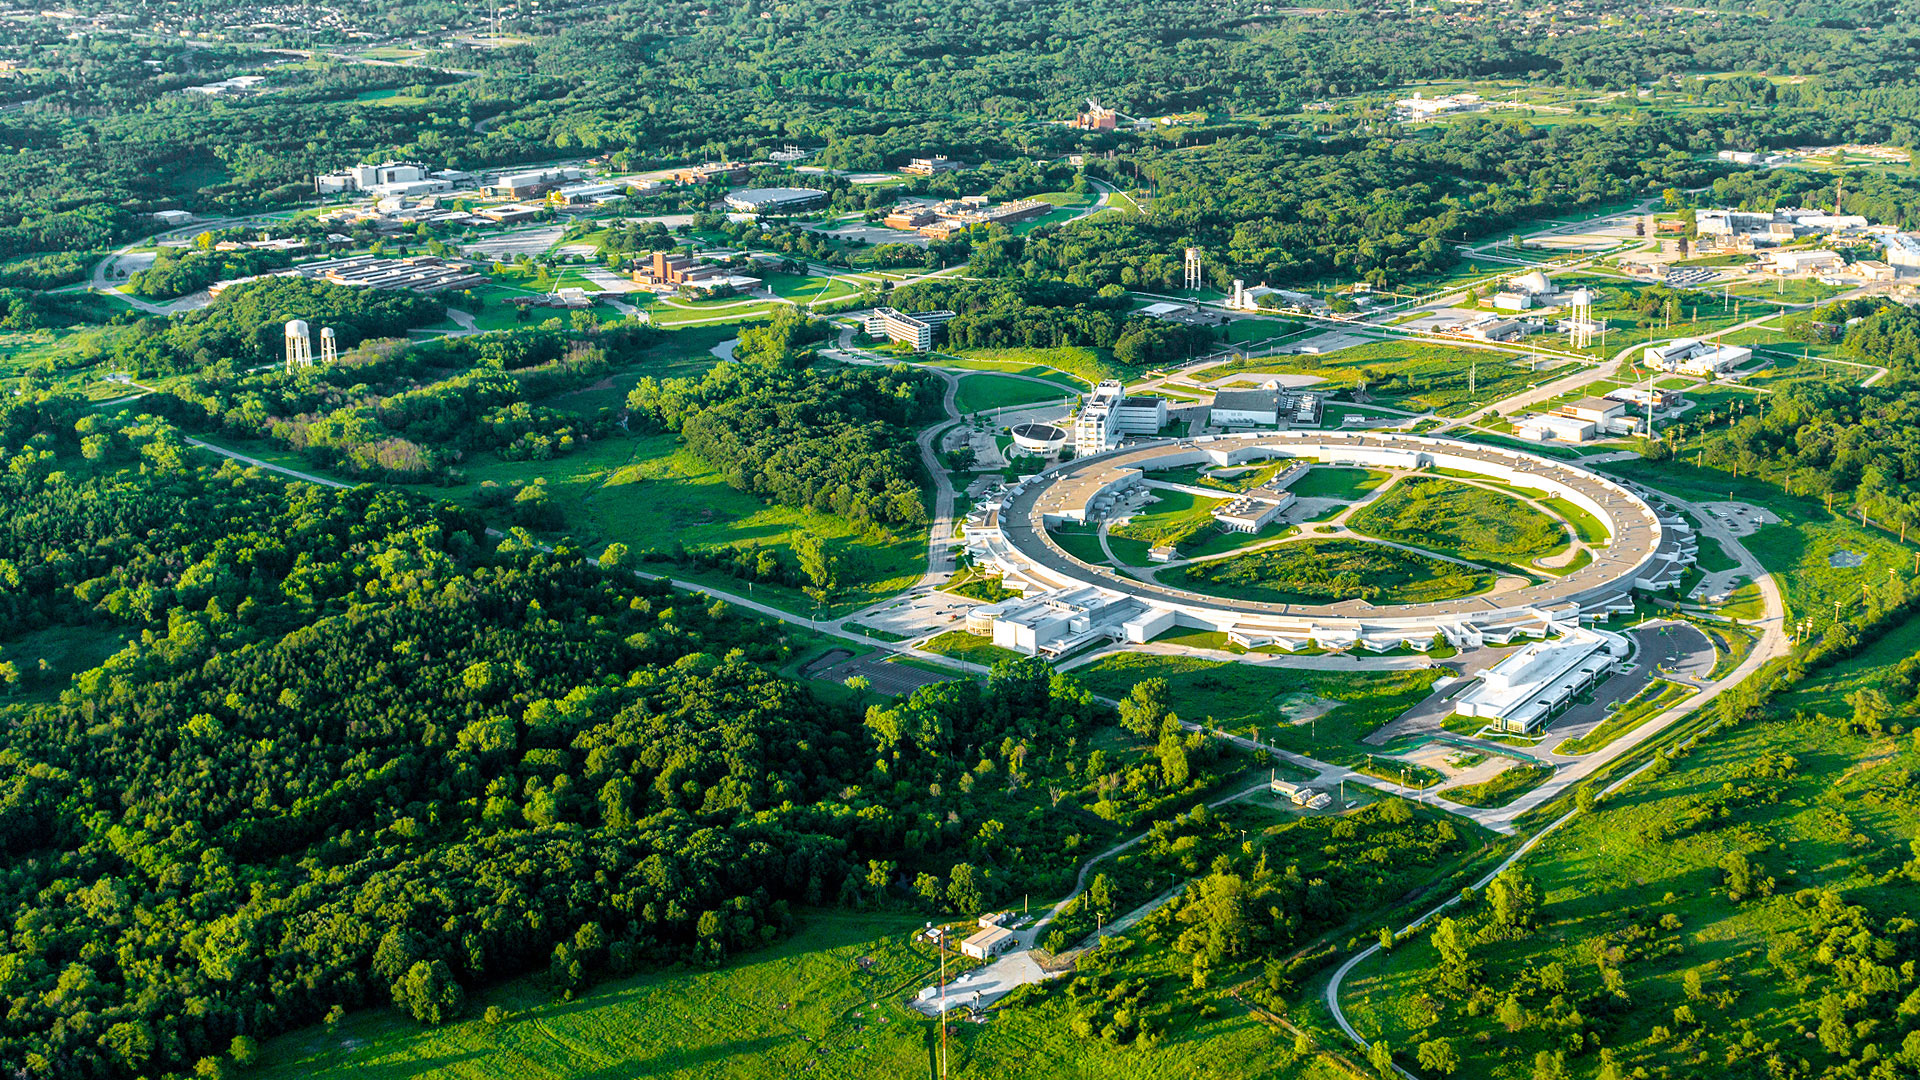 Aerial view of Argonne and surrounding landscape full of green trees and lawns.